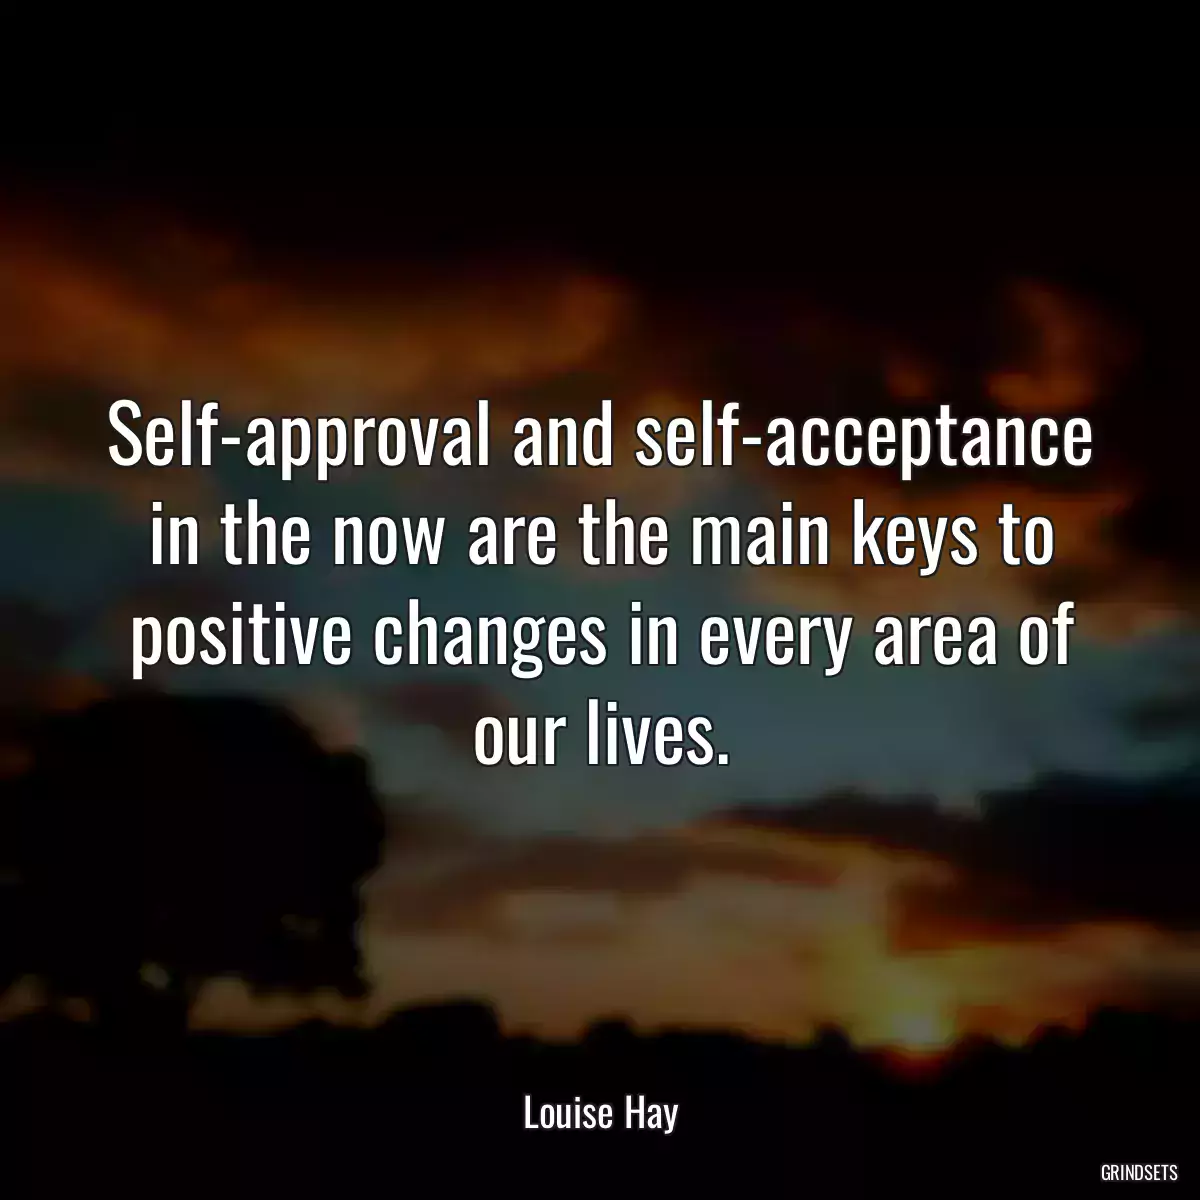 Self-approval and self-acceptance in the now are the main keys to positive changes in every area of our lives.